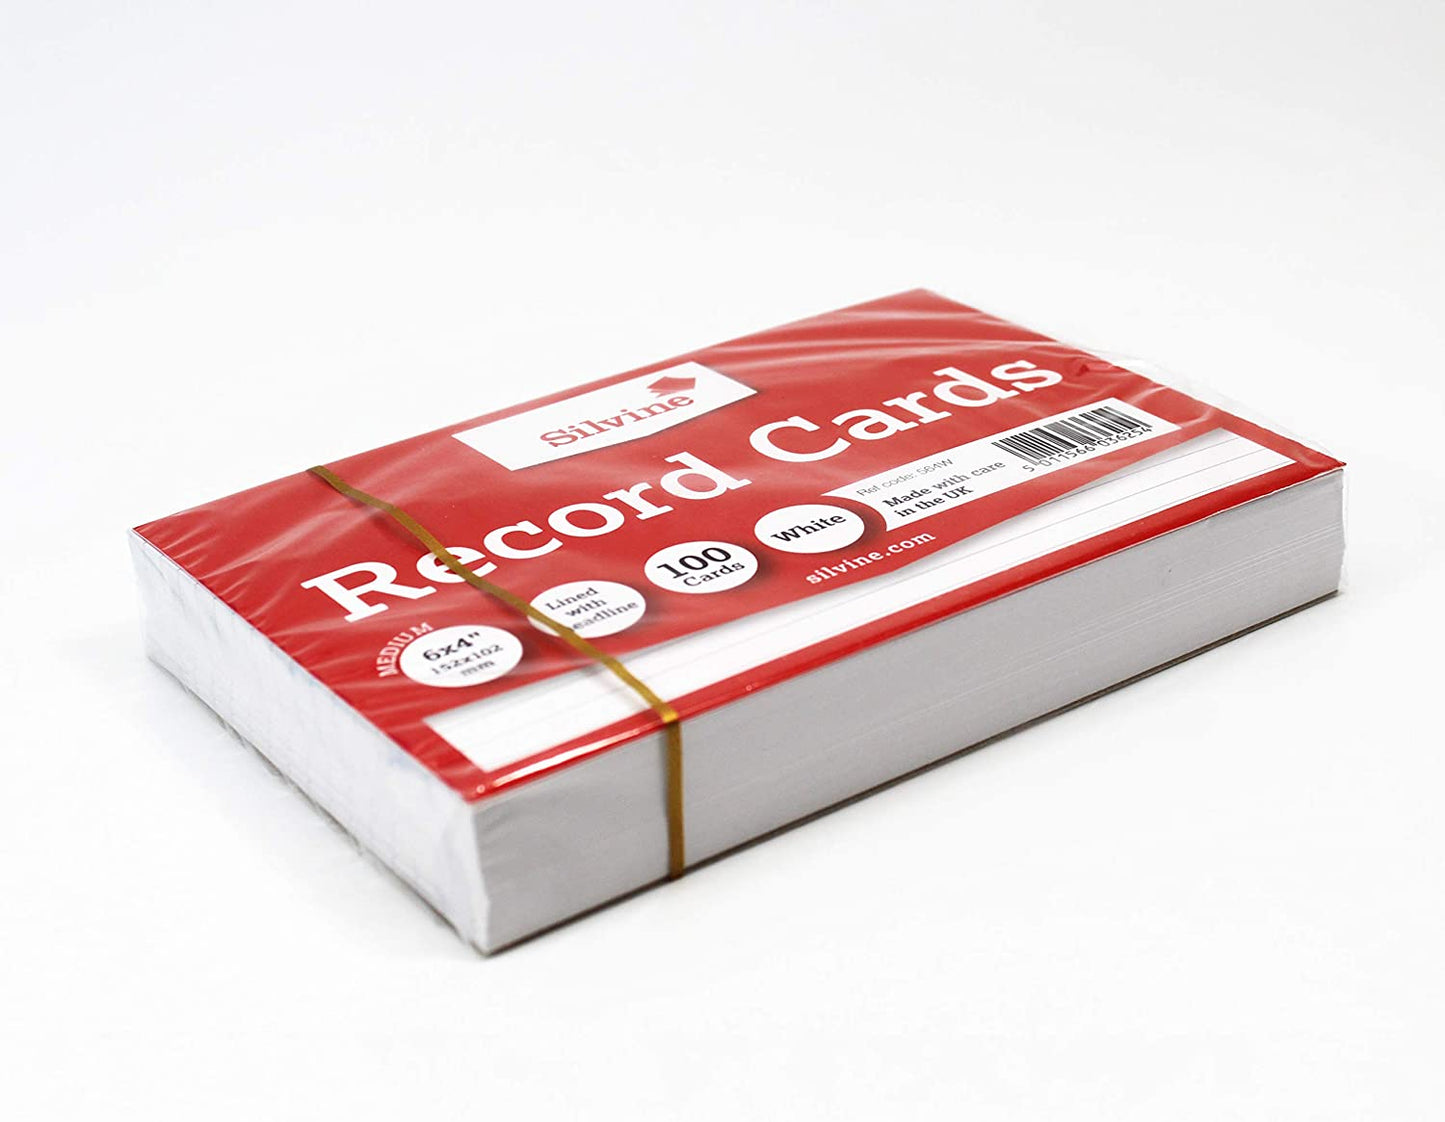 Pack of 100 6 x 4" Feint Ruled White Record Cards